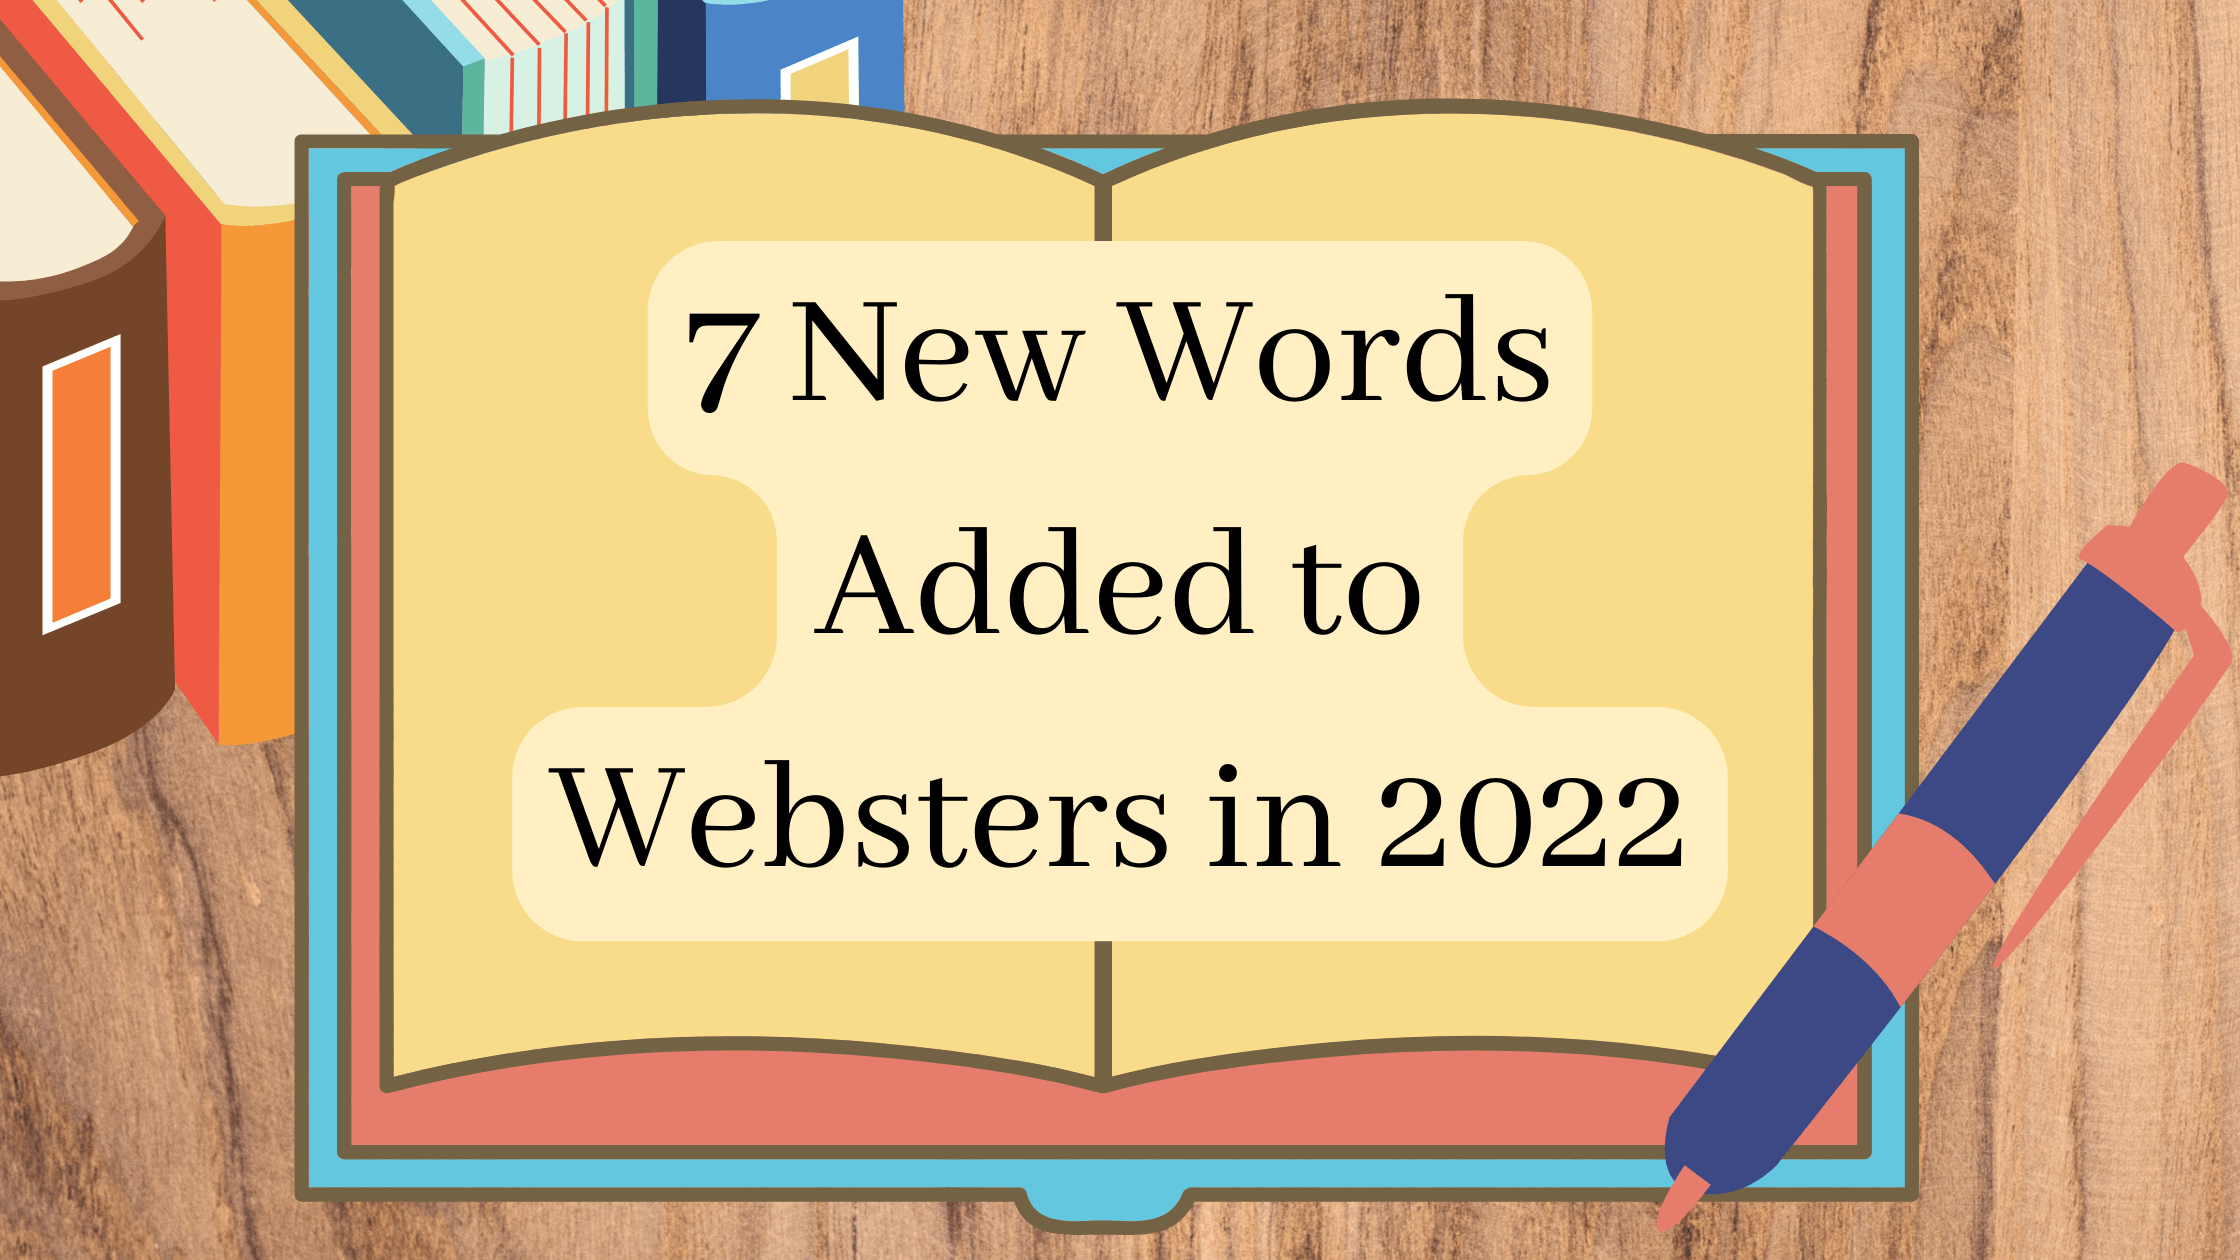 Merriam Webster Just Added 1,000 New Words To The Dictionary - New